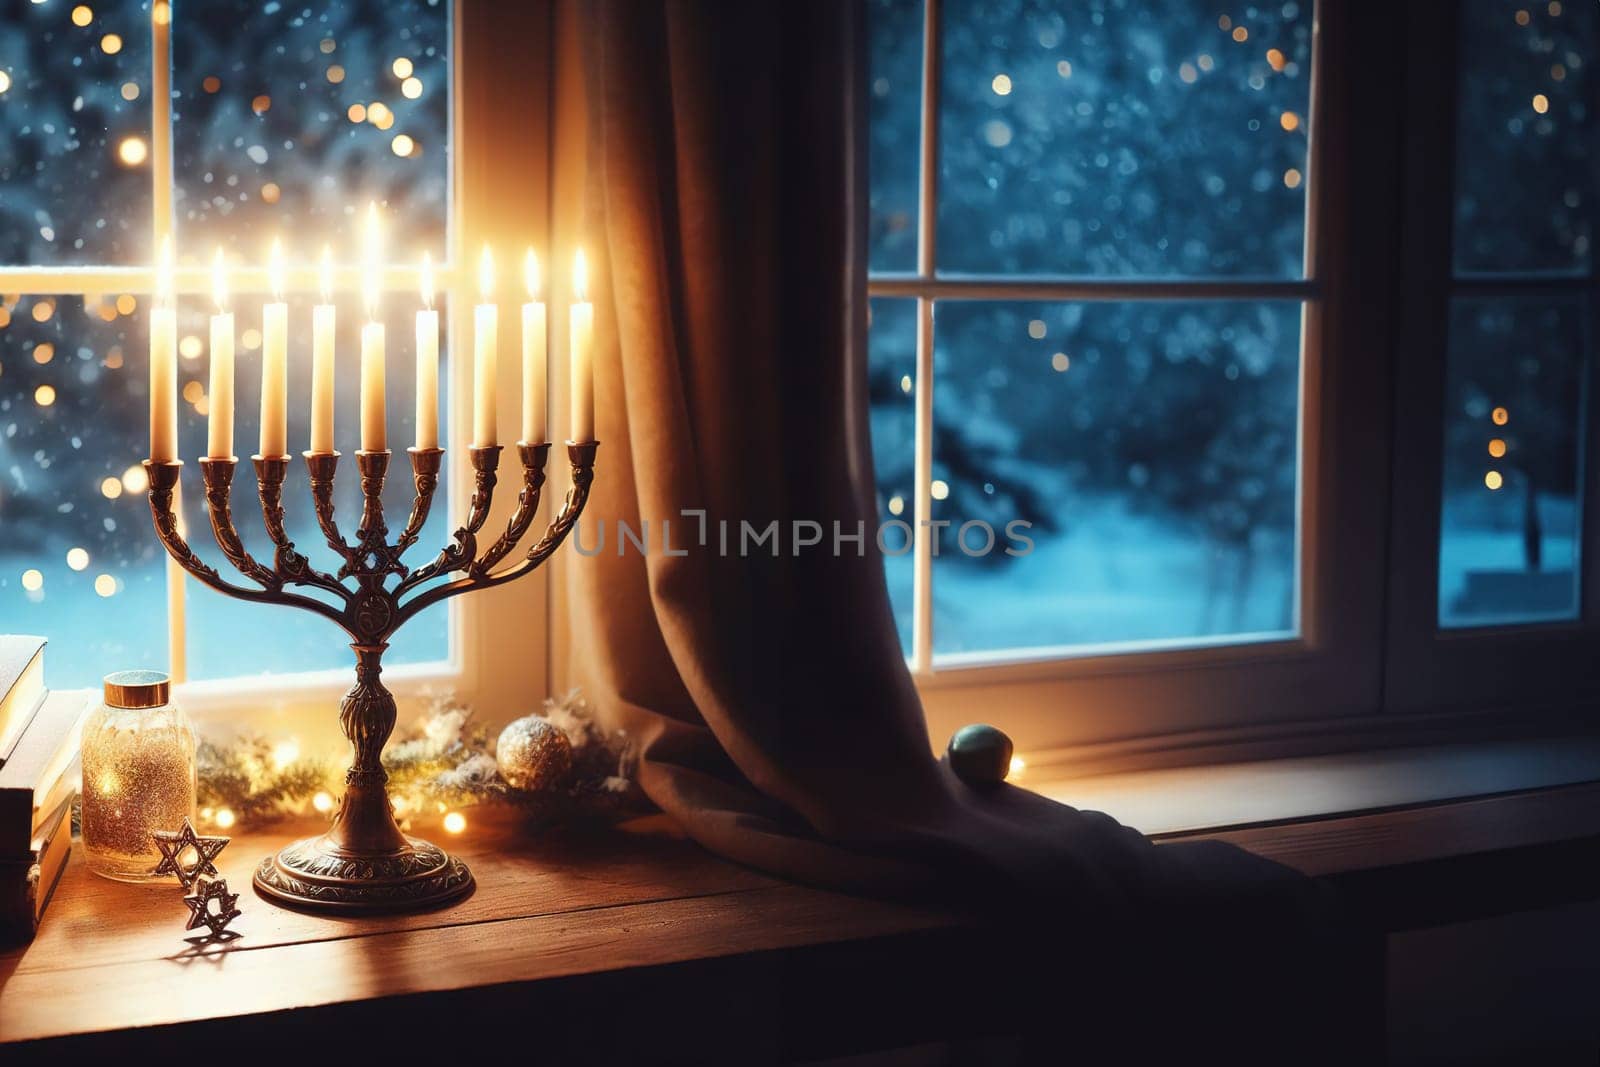 Hanukkah candles stand on sill against background window. Celebrating religious Jewish holiday.